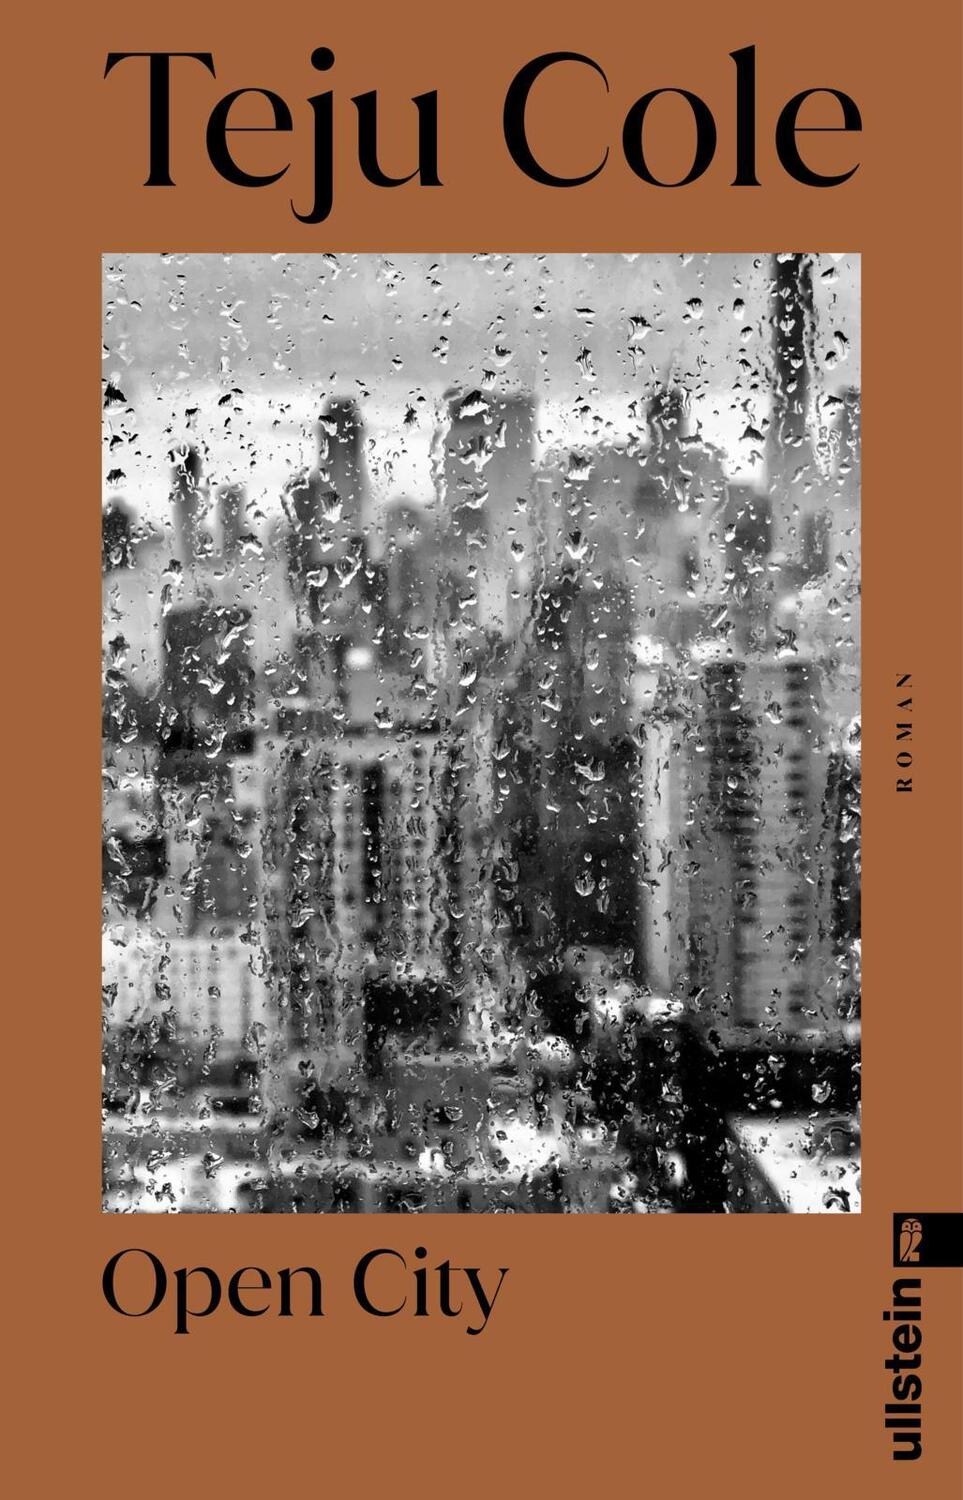 Cover: 9783548069517 | Open City | Roman Teju Coles Welterfolg in Neuauflage | Teju Cole